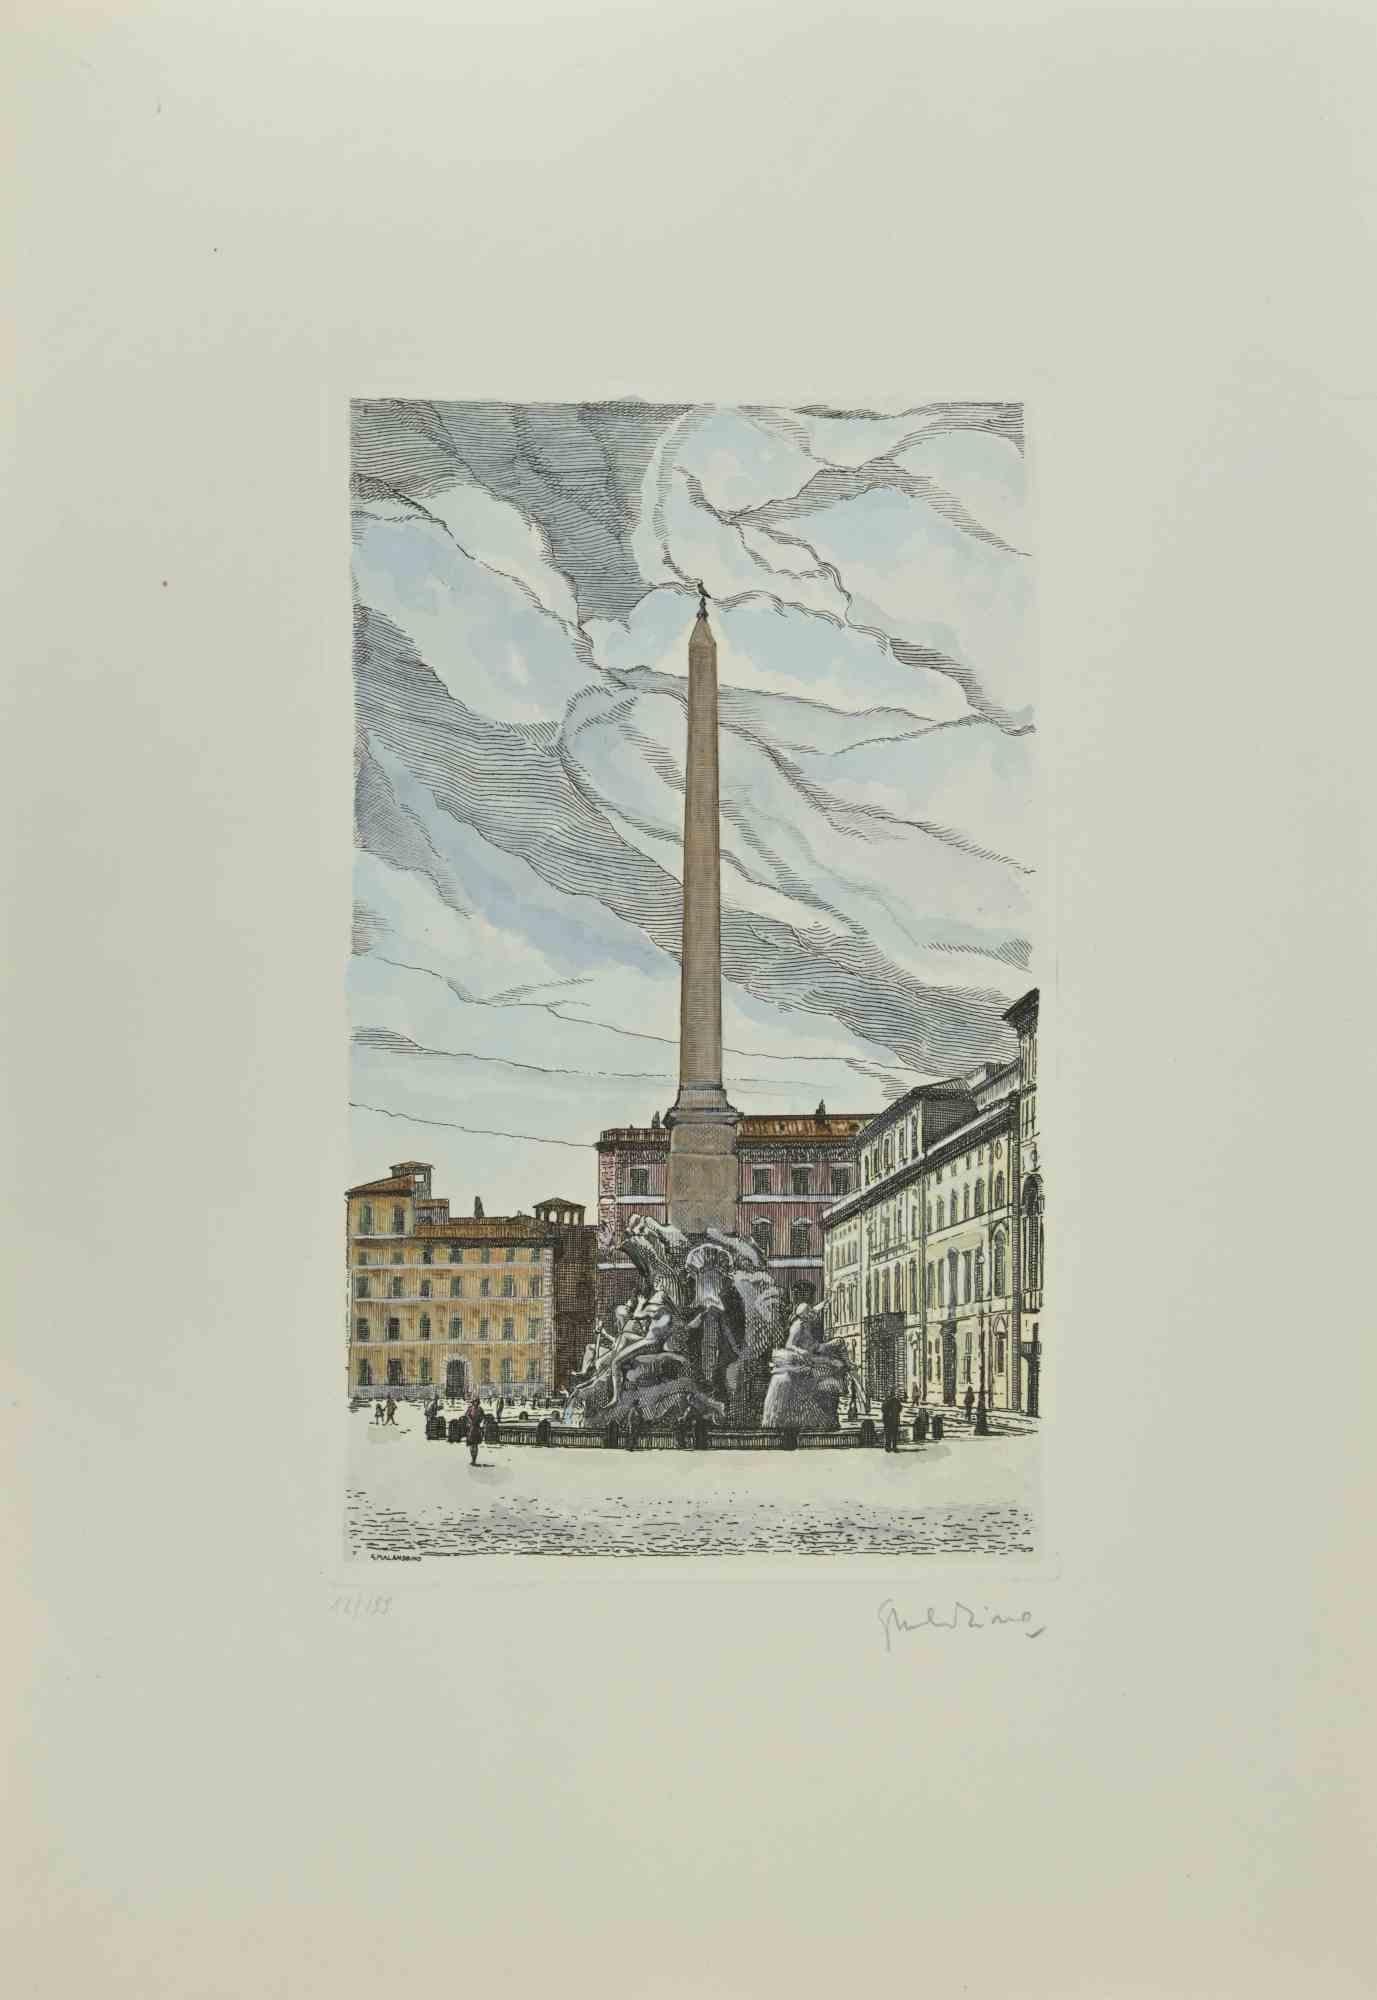 Fontana dei Quattro Fiumi is an artwork realized by Giuseppe Malandrino.

Original print in etching technique.

Hand-signed by the artist in pencil on the lower right corner.

Numbered n. 12/199 edition on the lower left corner

Good conditions.